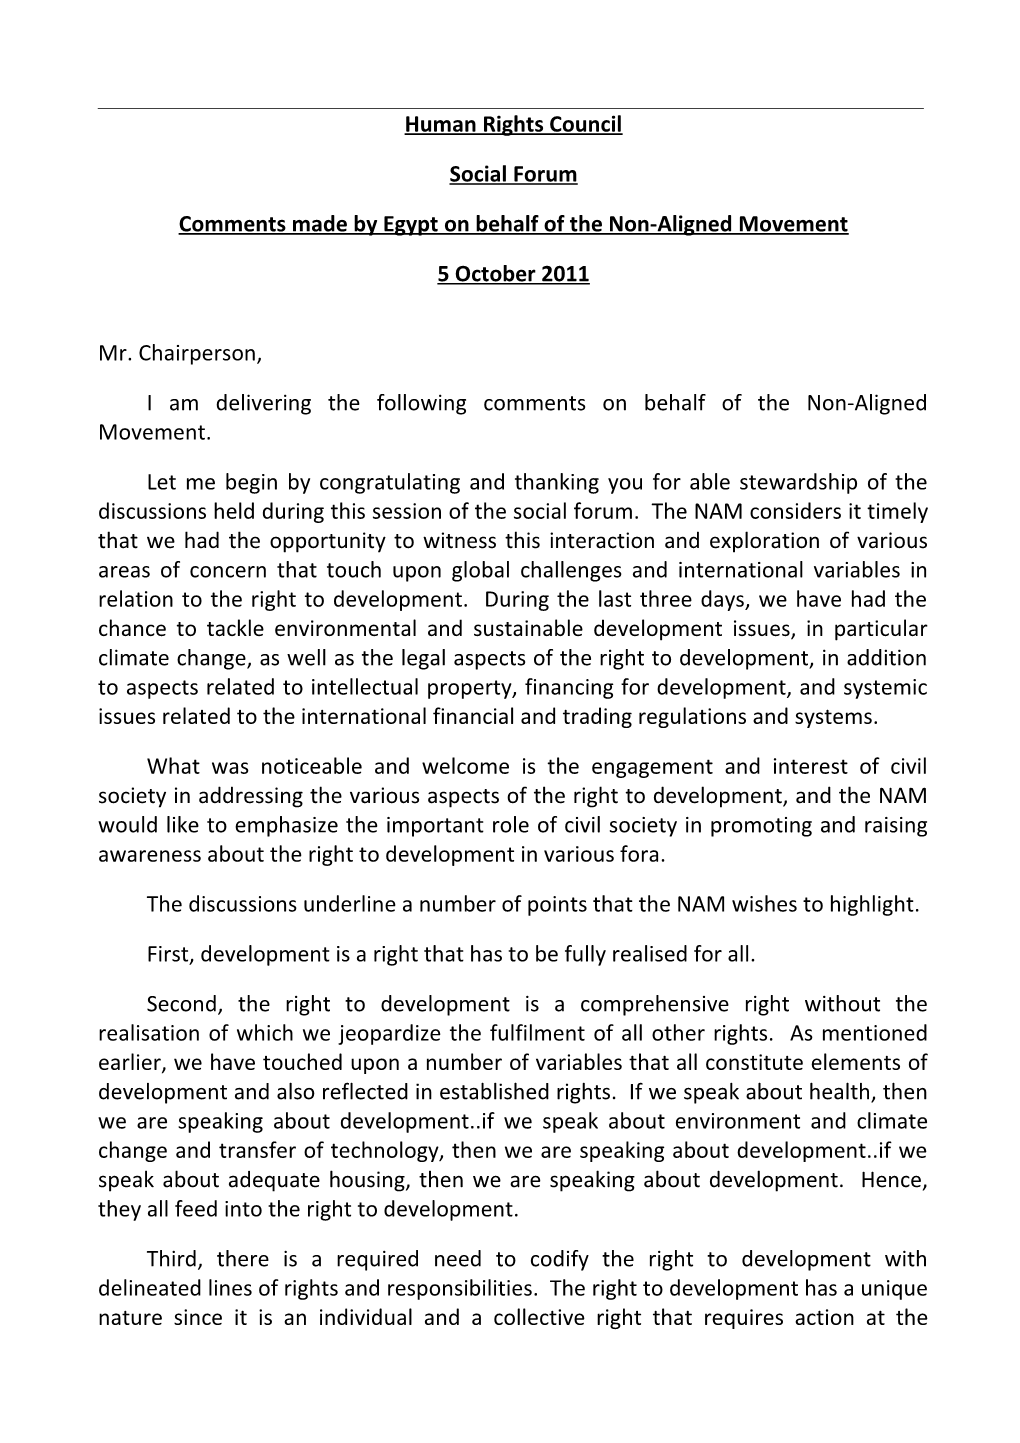 Comments Made by Egypt on Behalf of the Non-Aligned Movement